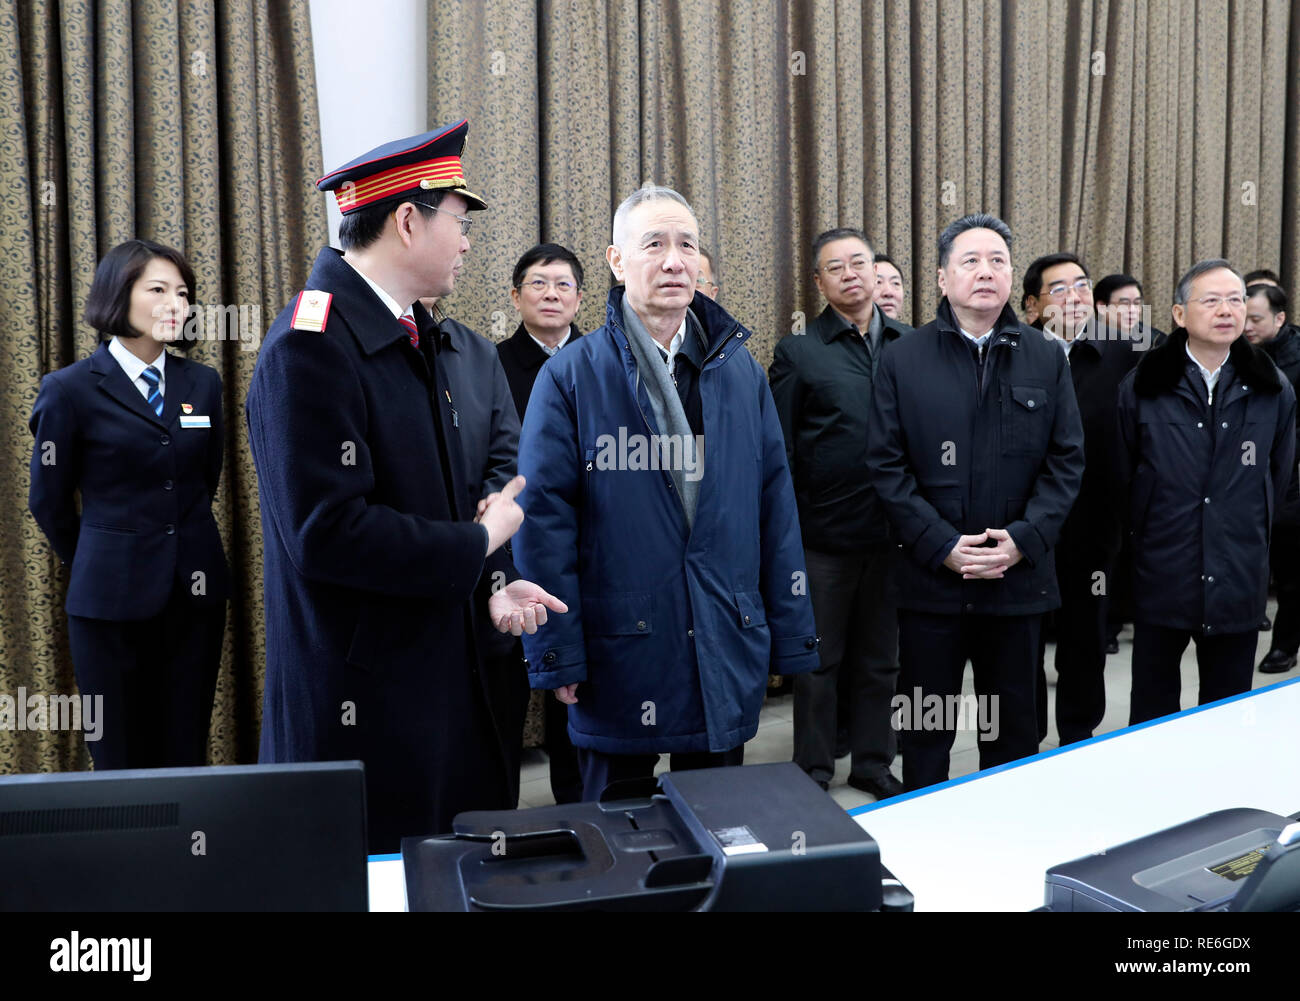 Beijing, China. 20th Jan, 2019. Chinese Vice Premier Liu He inspects the preparatory work for holiday travels at the Beijing Railway Station in Beijing, capital of China, Jan. 20, 2019. Liu He has called on the country's transport authorities to work to ensure safety and efficiency during the 40-day Spring Festival travel rush season starting Monday. Credit: Yao Dawei/Xinhua/Alamy Live News Stock Photo